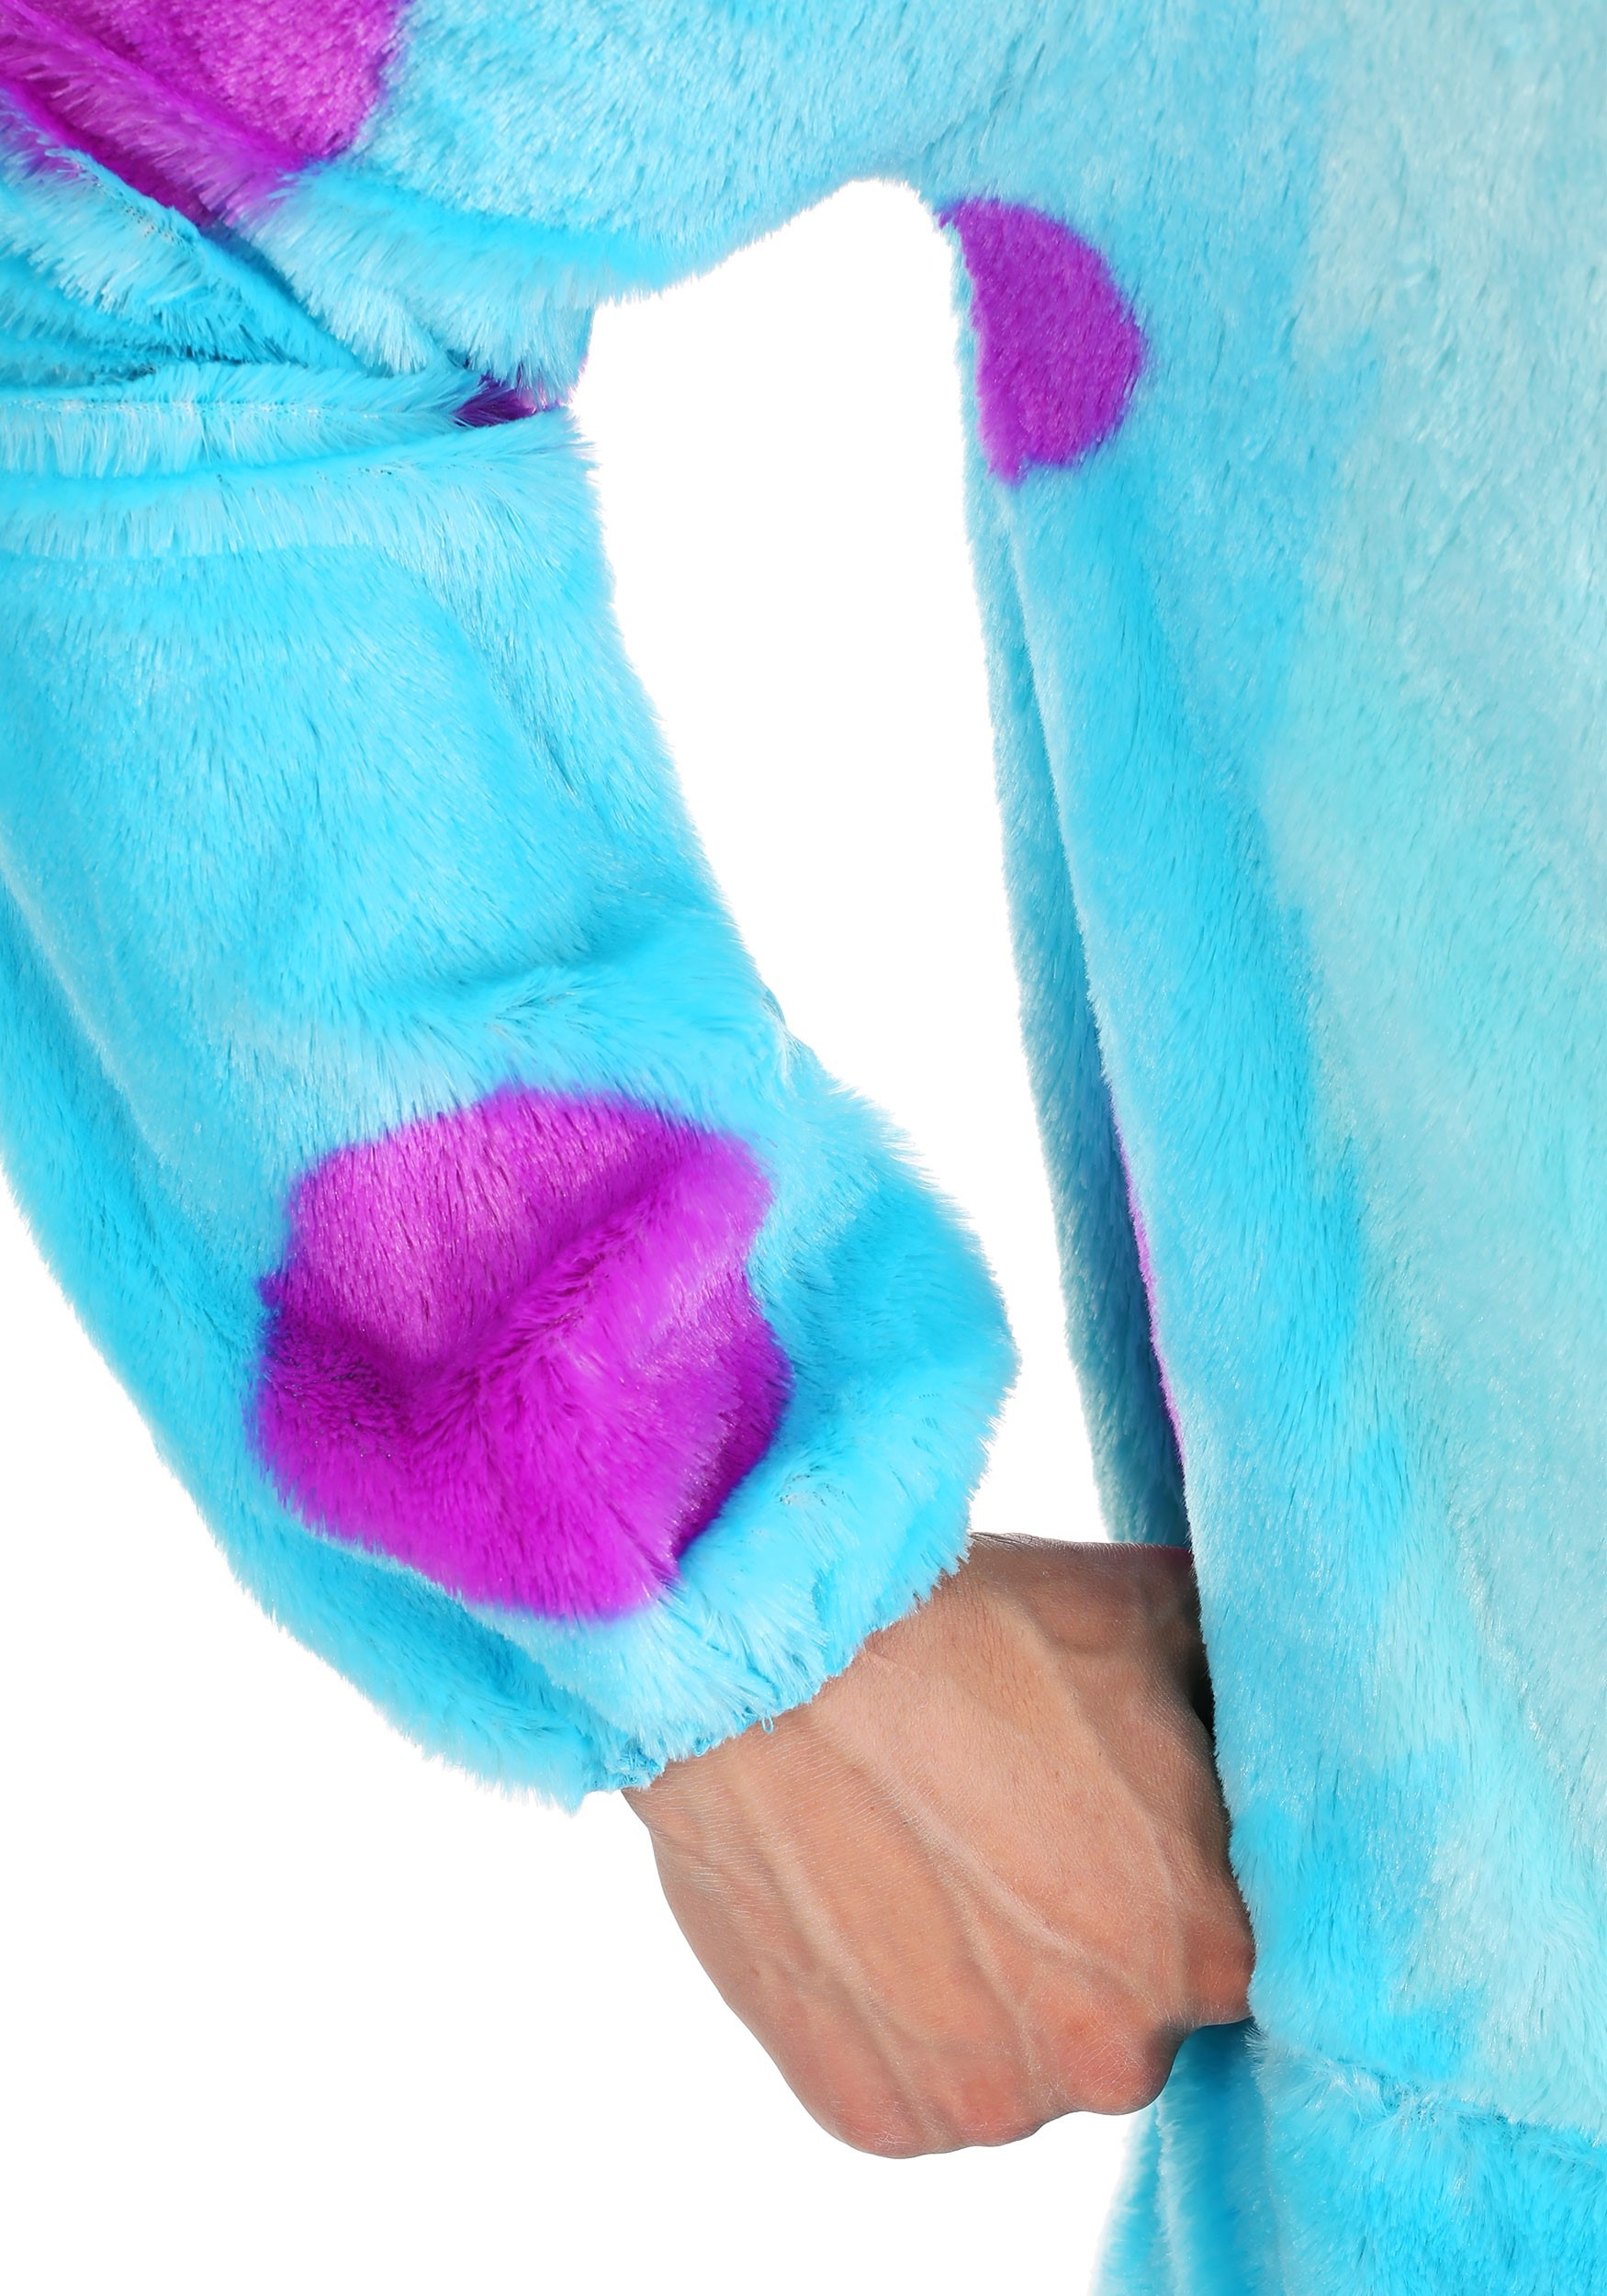 Adult Sulley Fancy Dress Costume , Adult Monsters Inc. Fancy Dress Costumes